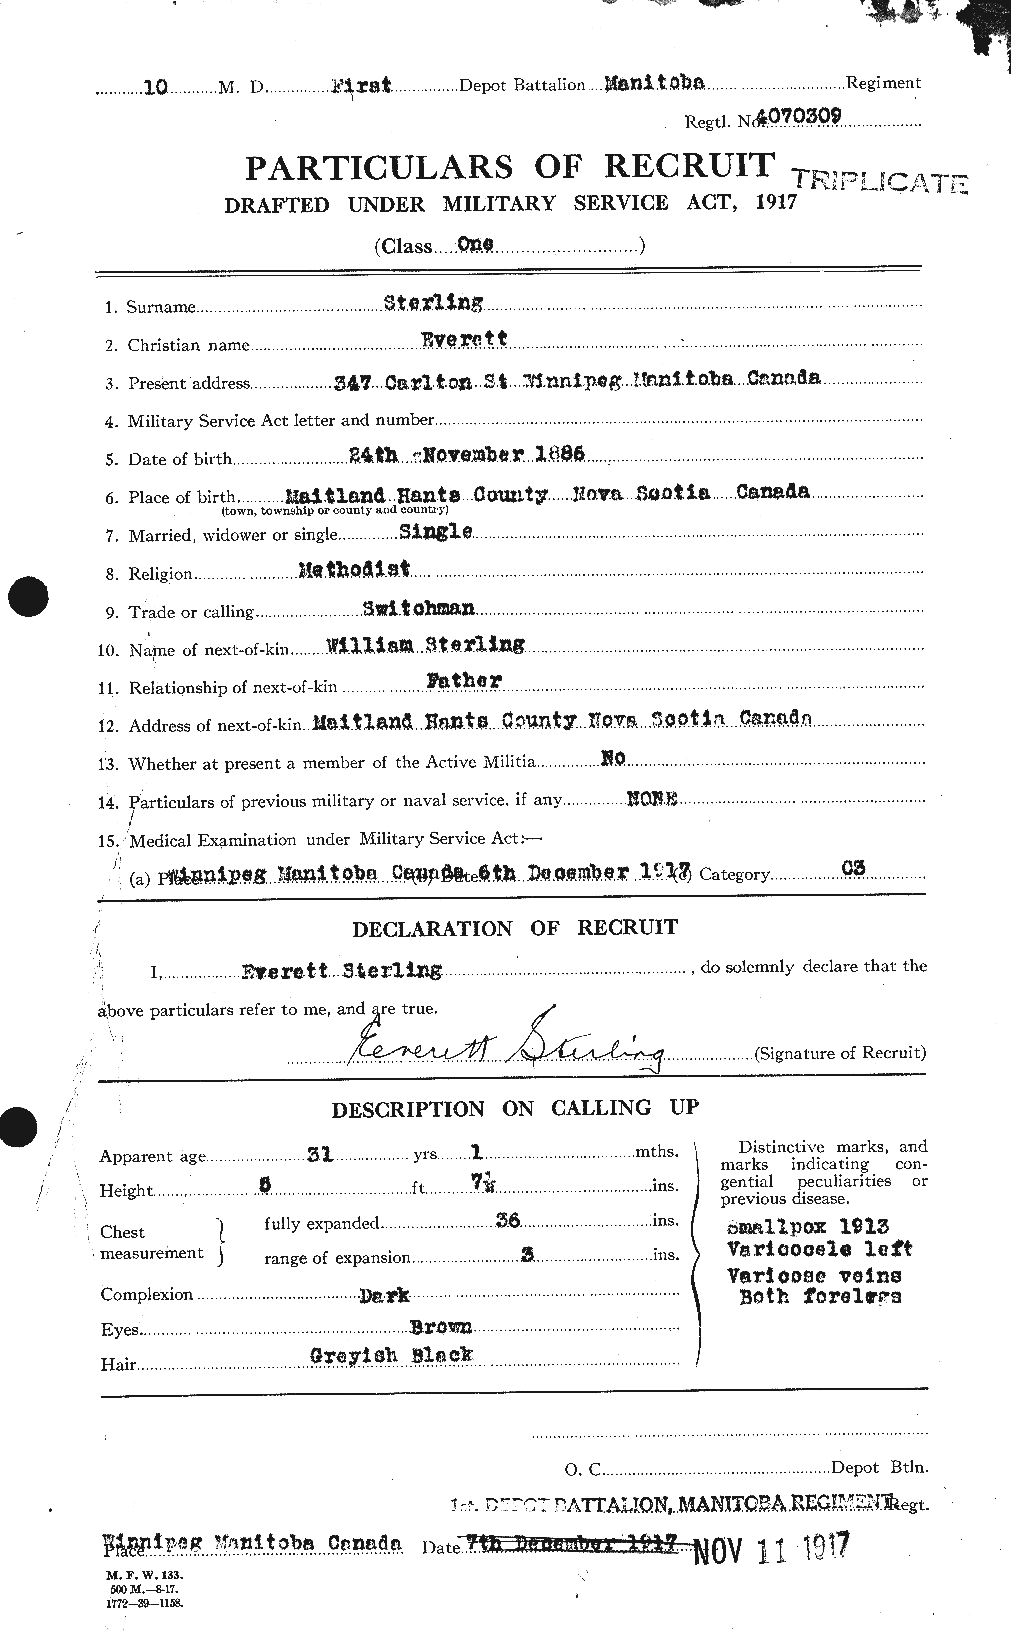 Personnel Records of the First World War - CEF 115175a